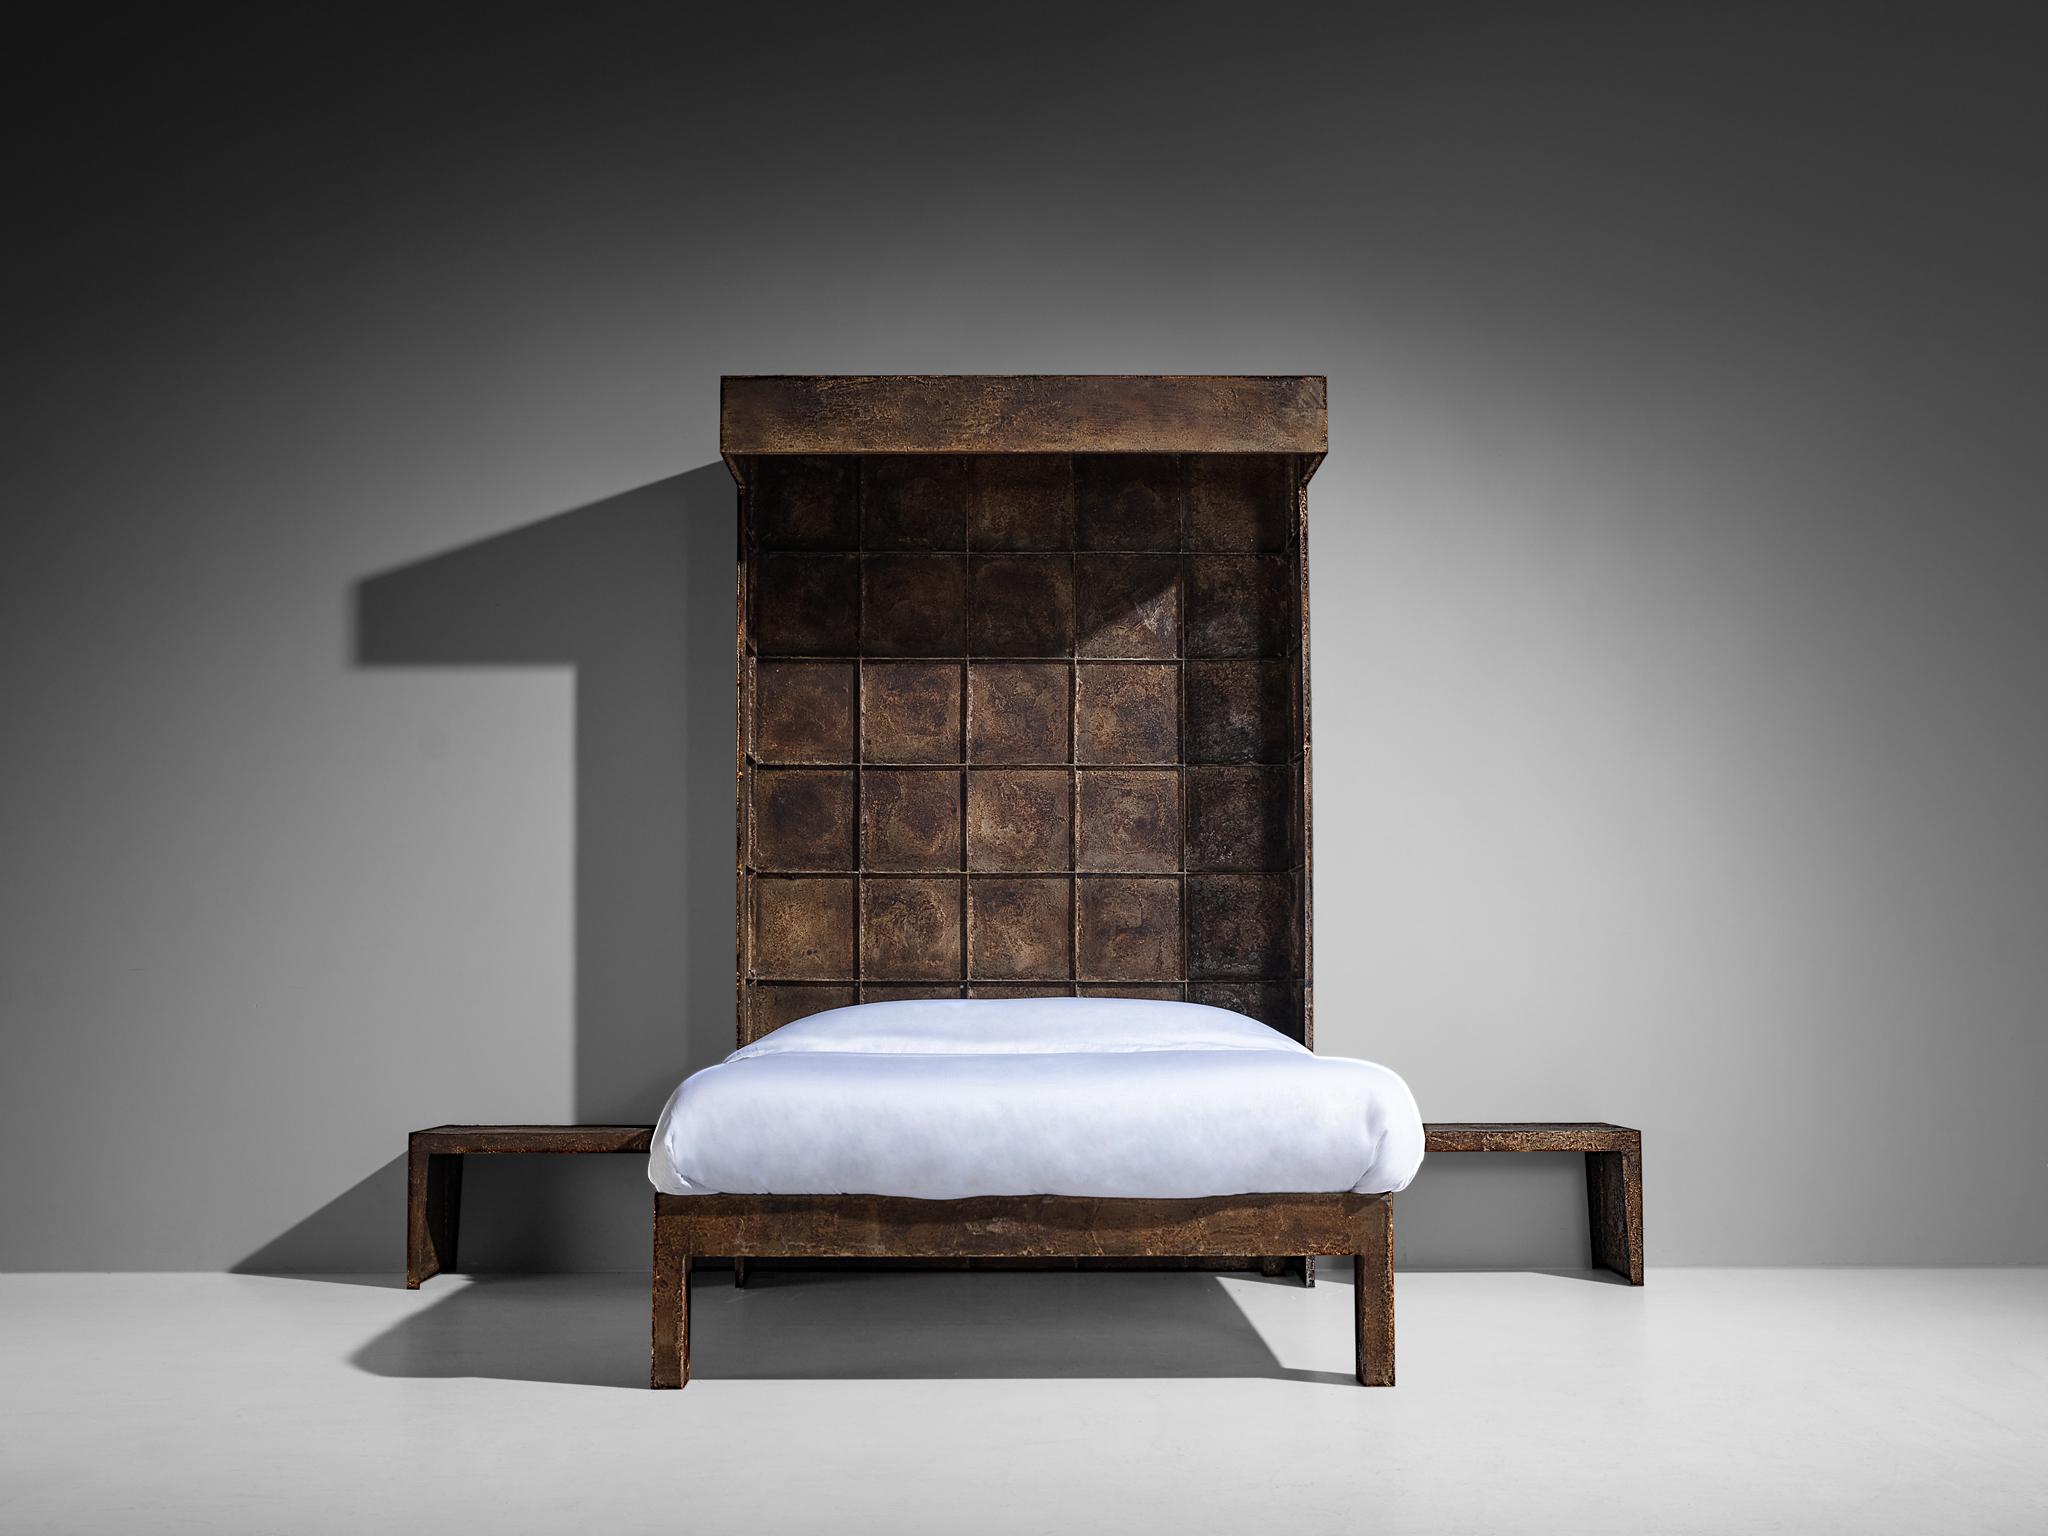 Mid-Century Modern Pia Manu Unique Handcrafted Bedroom Set in Wrought Iron